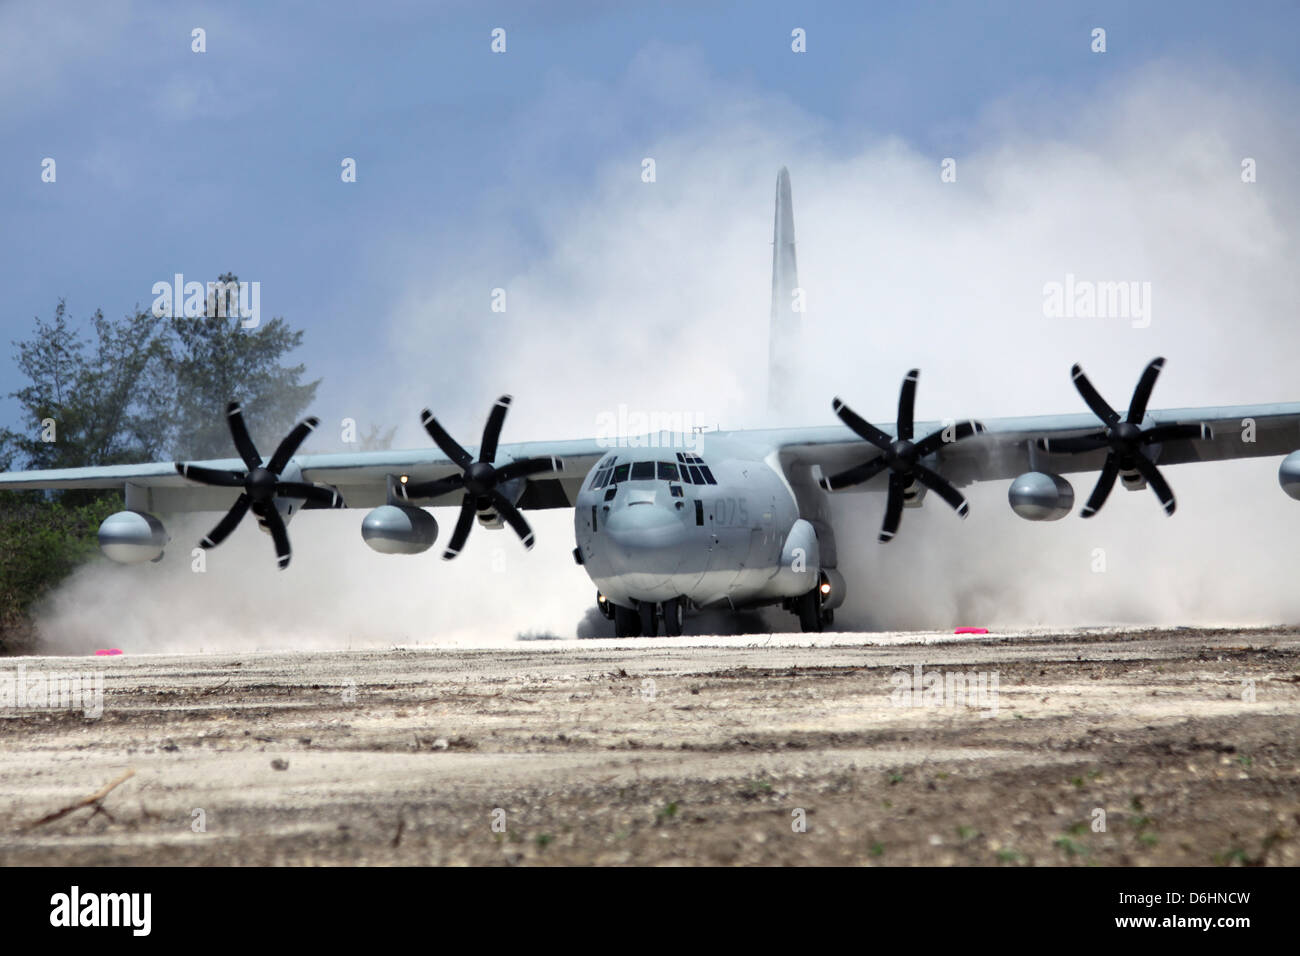 A USMC KC-130J Hercules aircraft lands on Tinian Island the first aircraft to land there since 1947 during Exercise Geiger Fury May 30, 2012 in Okinawa, Japan. Stock Photo